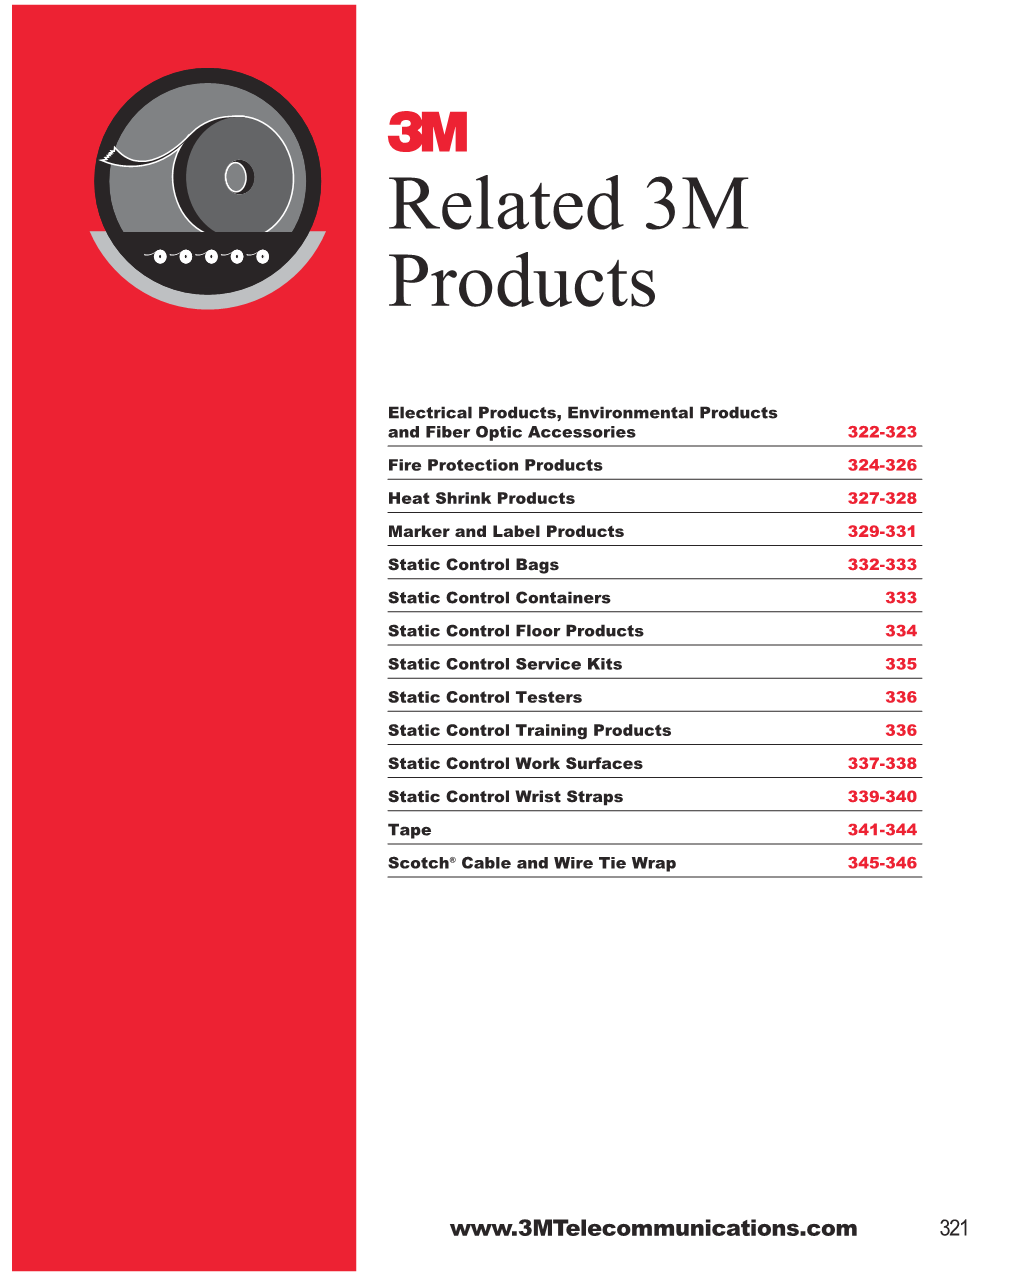 Related 3M Products